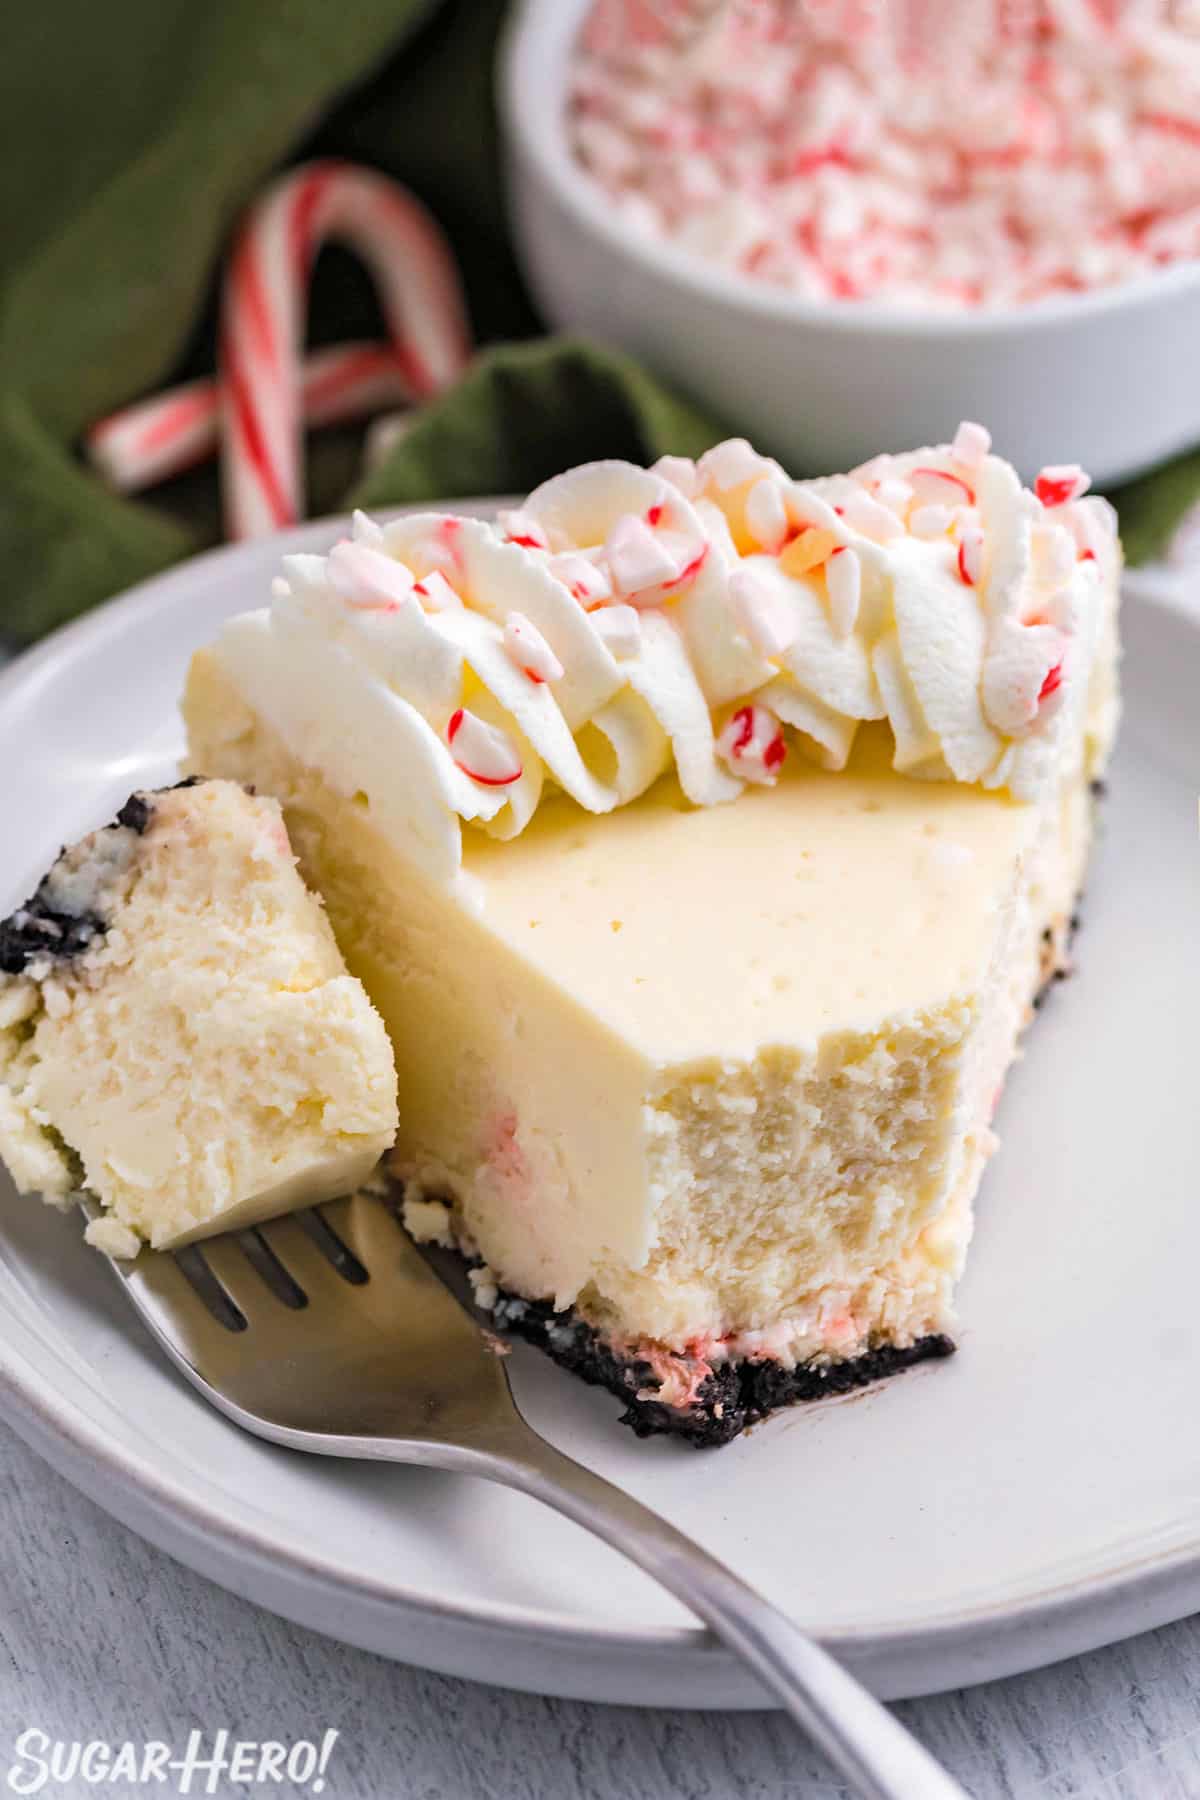 Slice of Candy Cane Cheesecake on a white plate, with a bite taken out of it.